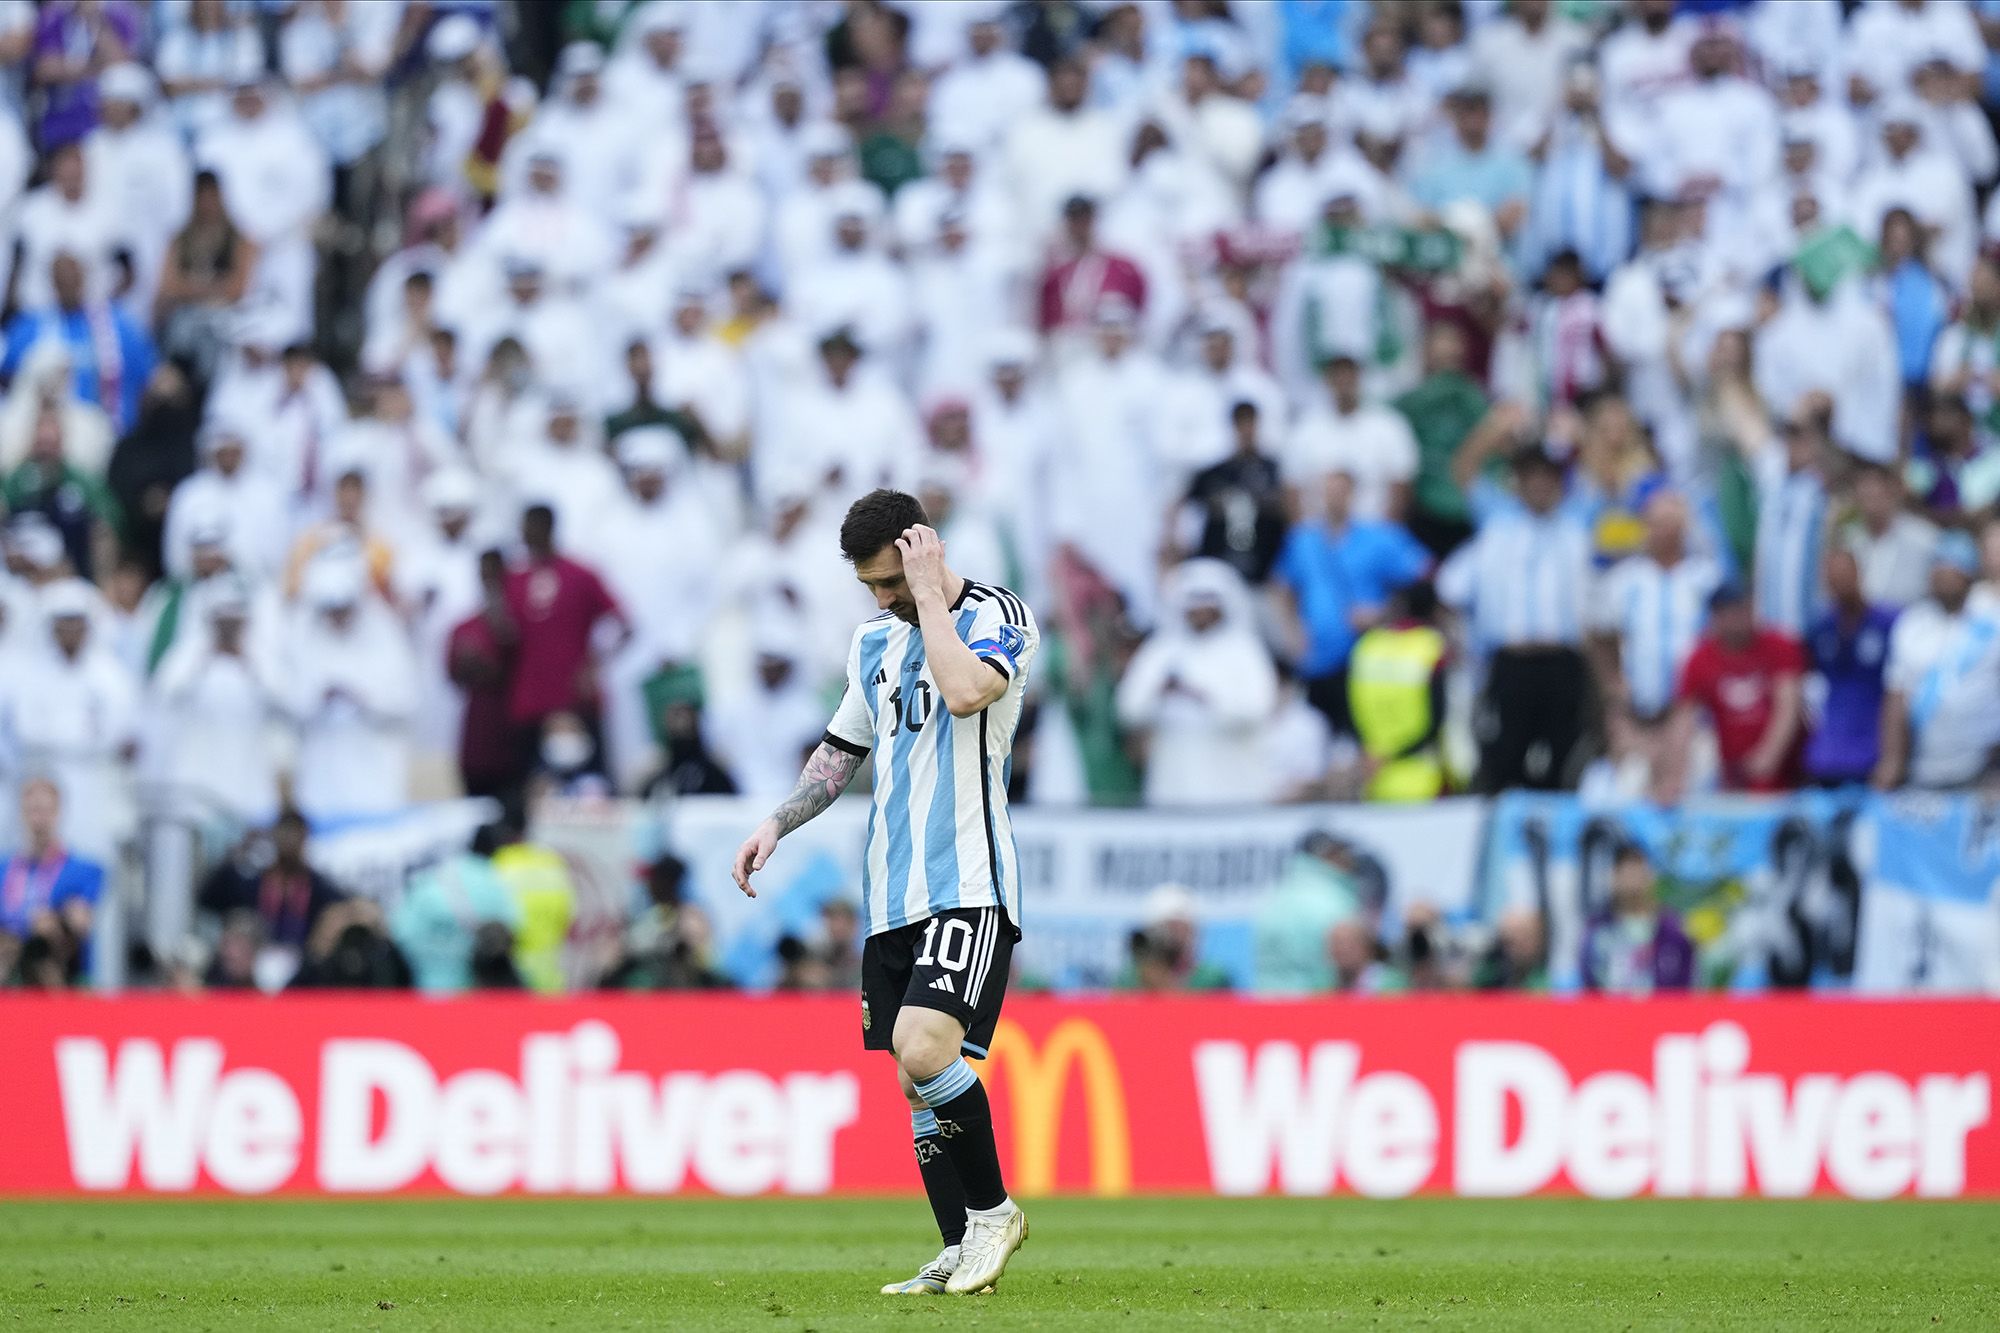 Saudi Arabia's victory over Argentina is the greatest upset in World Cup  history, says data company | CNN